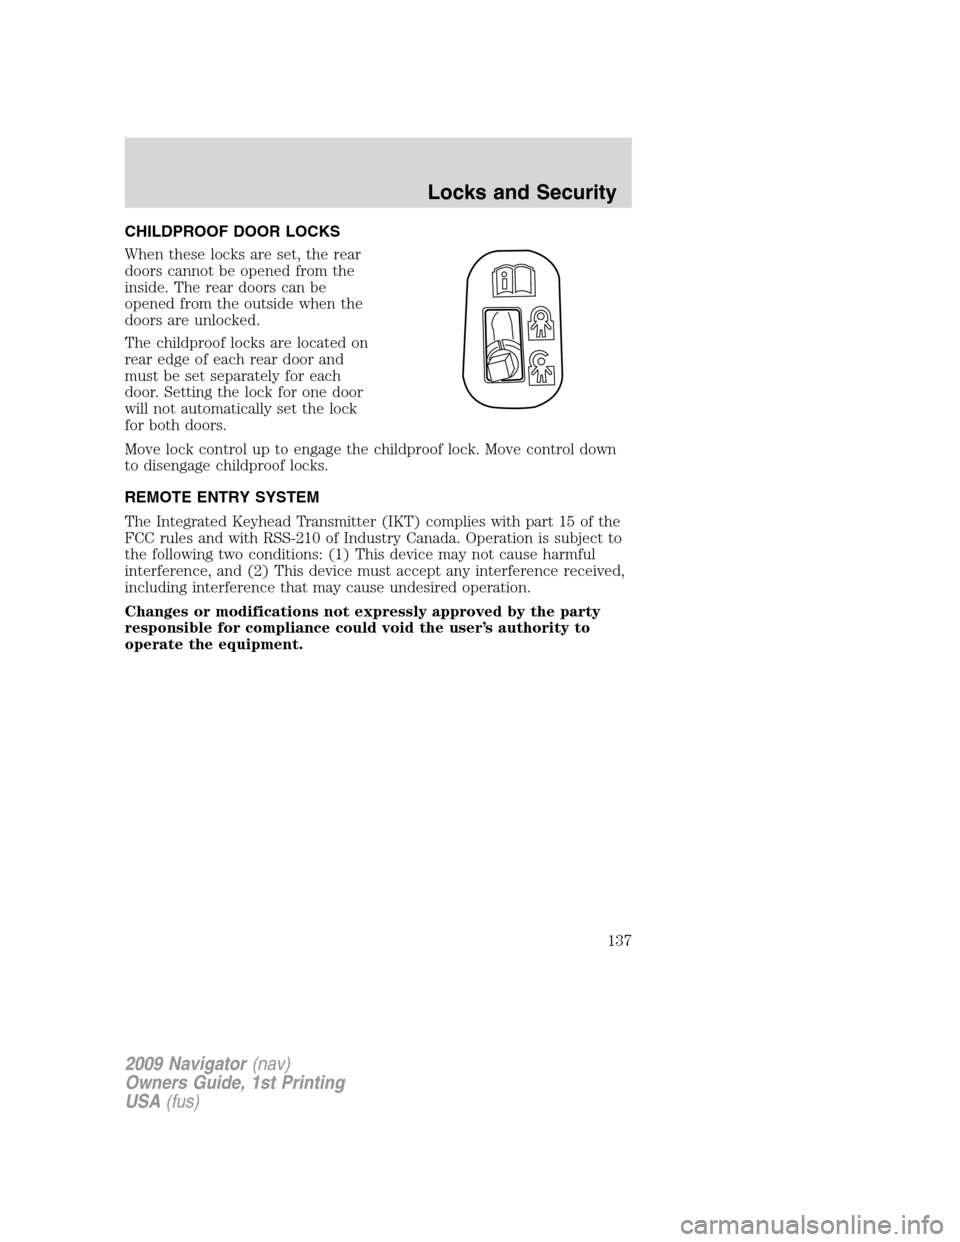 LINCOLN NAVIGATOR 2009 User Guide CHILDPROOF DOOR LOCKS
When these locks are set, the rear
doors cannot be opened from the
inside. The rear doors can be
opened from the outside when the
doors are unlocked.
The childproof locks are loc